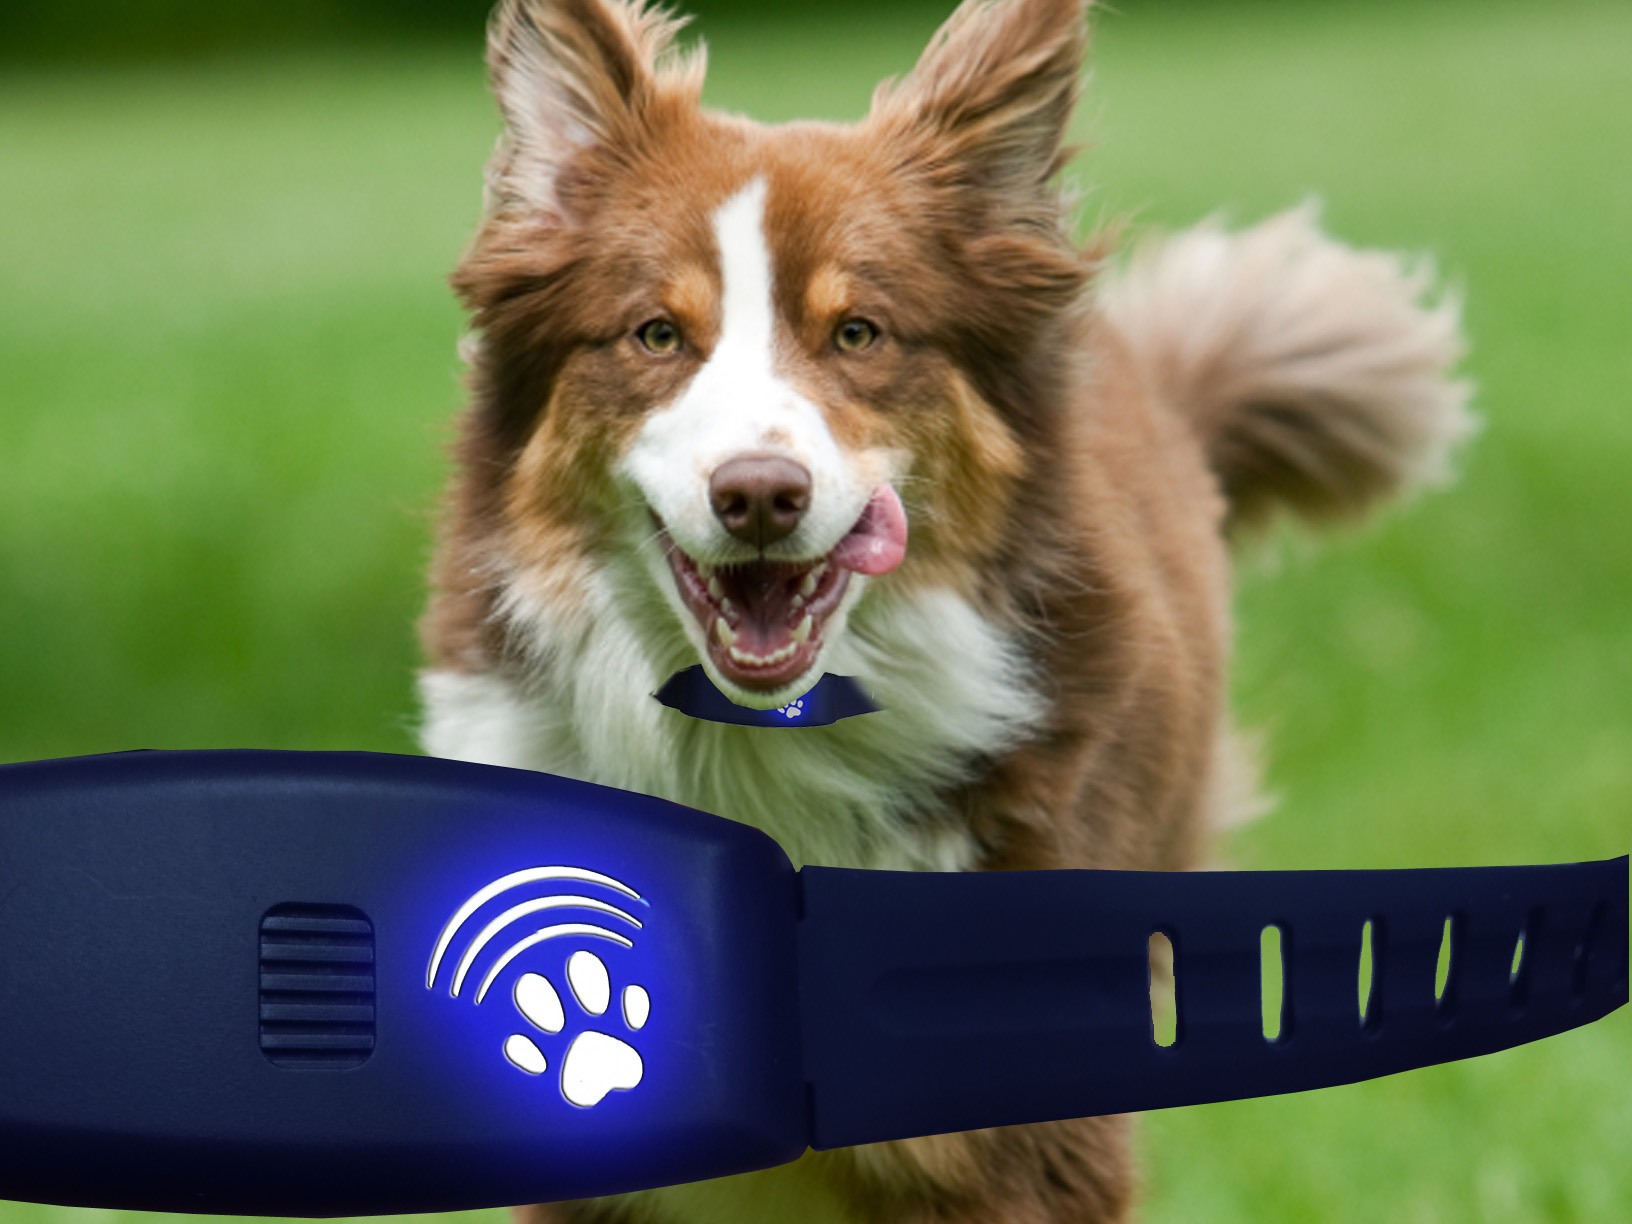 High Tech Pet New Dog Training Collar Has GPS Tracking & Invisible Fence